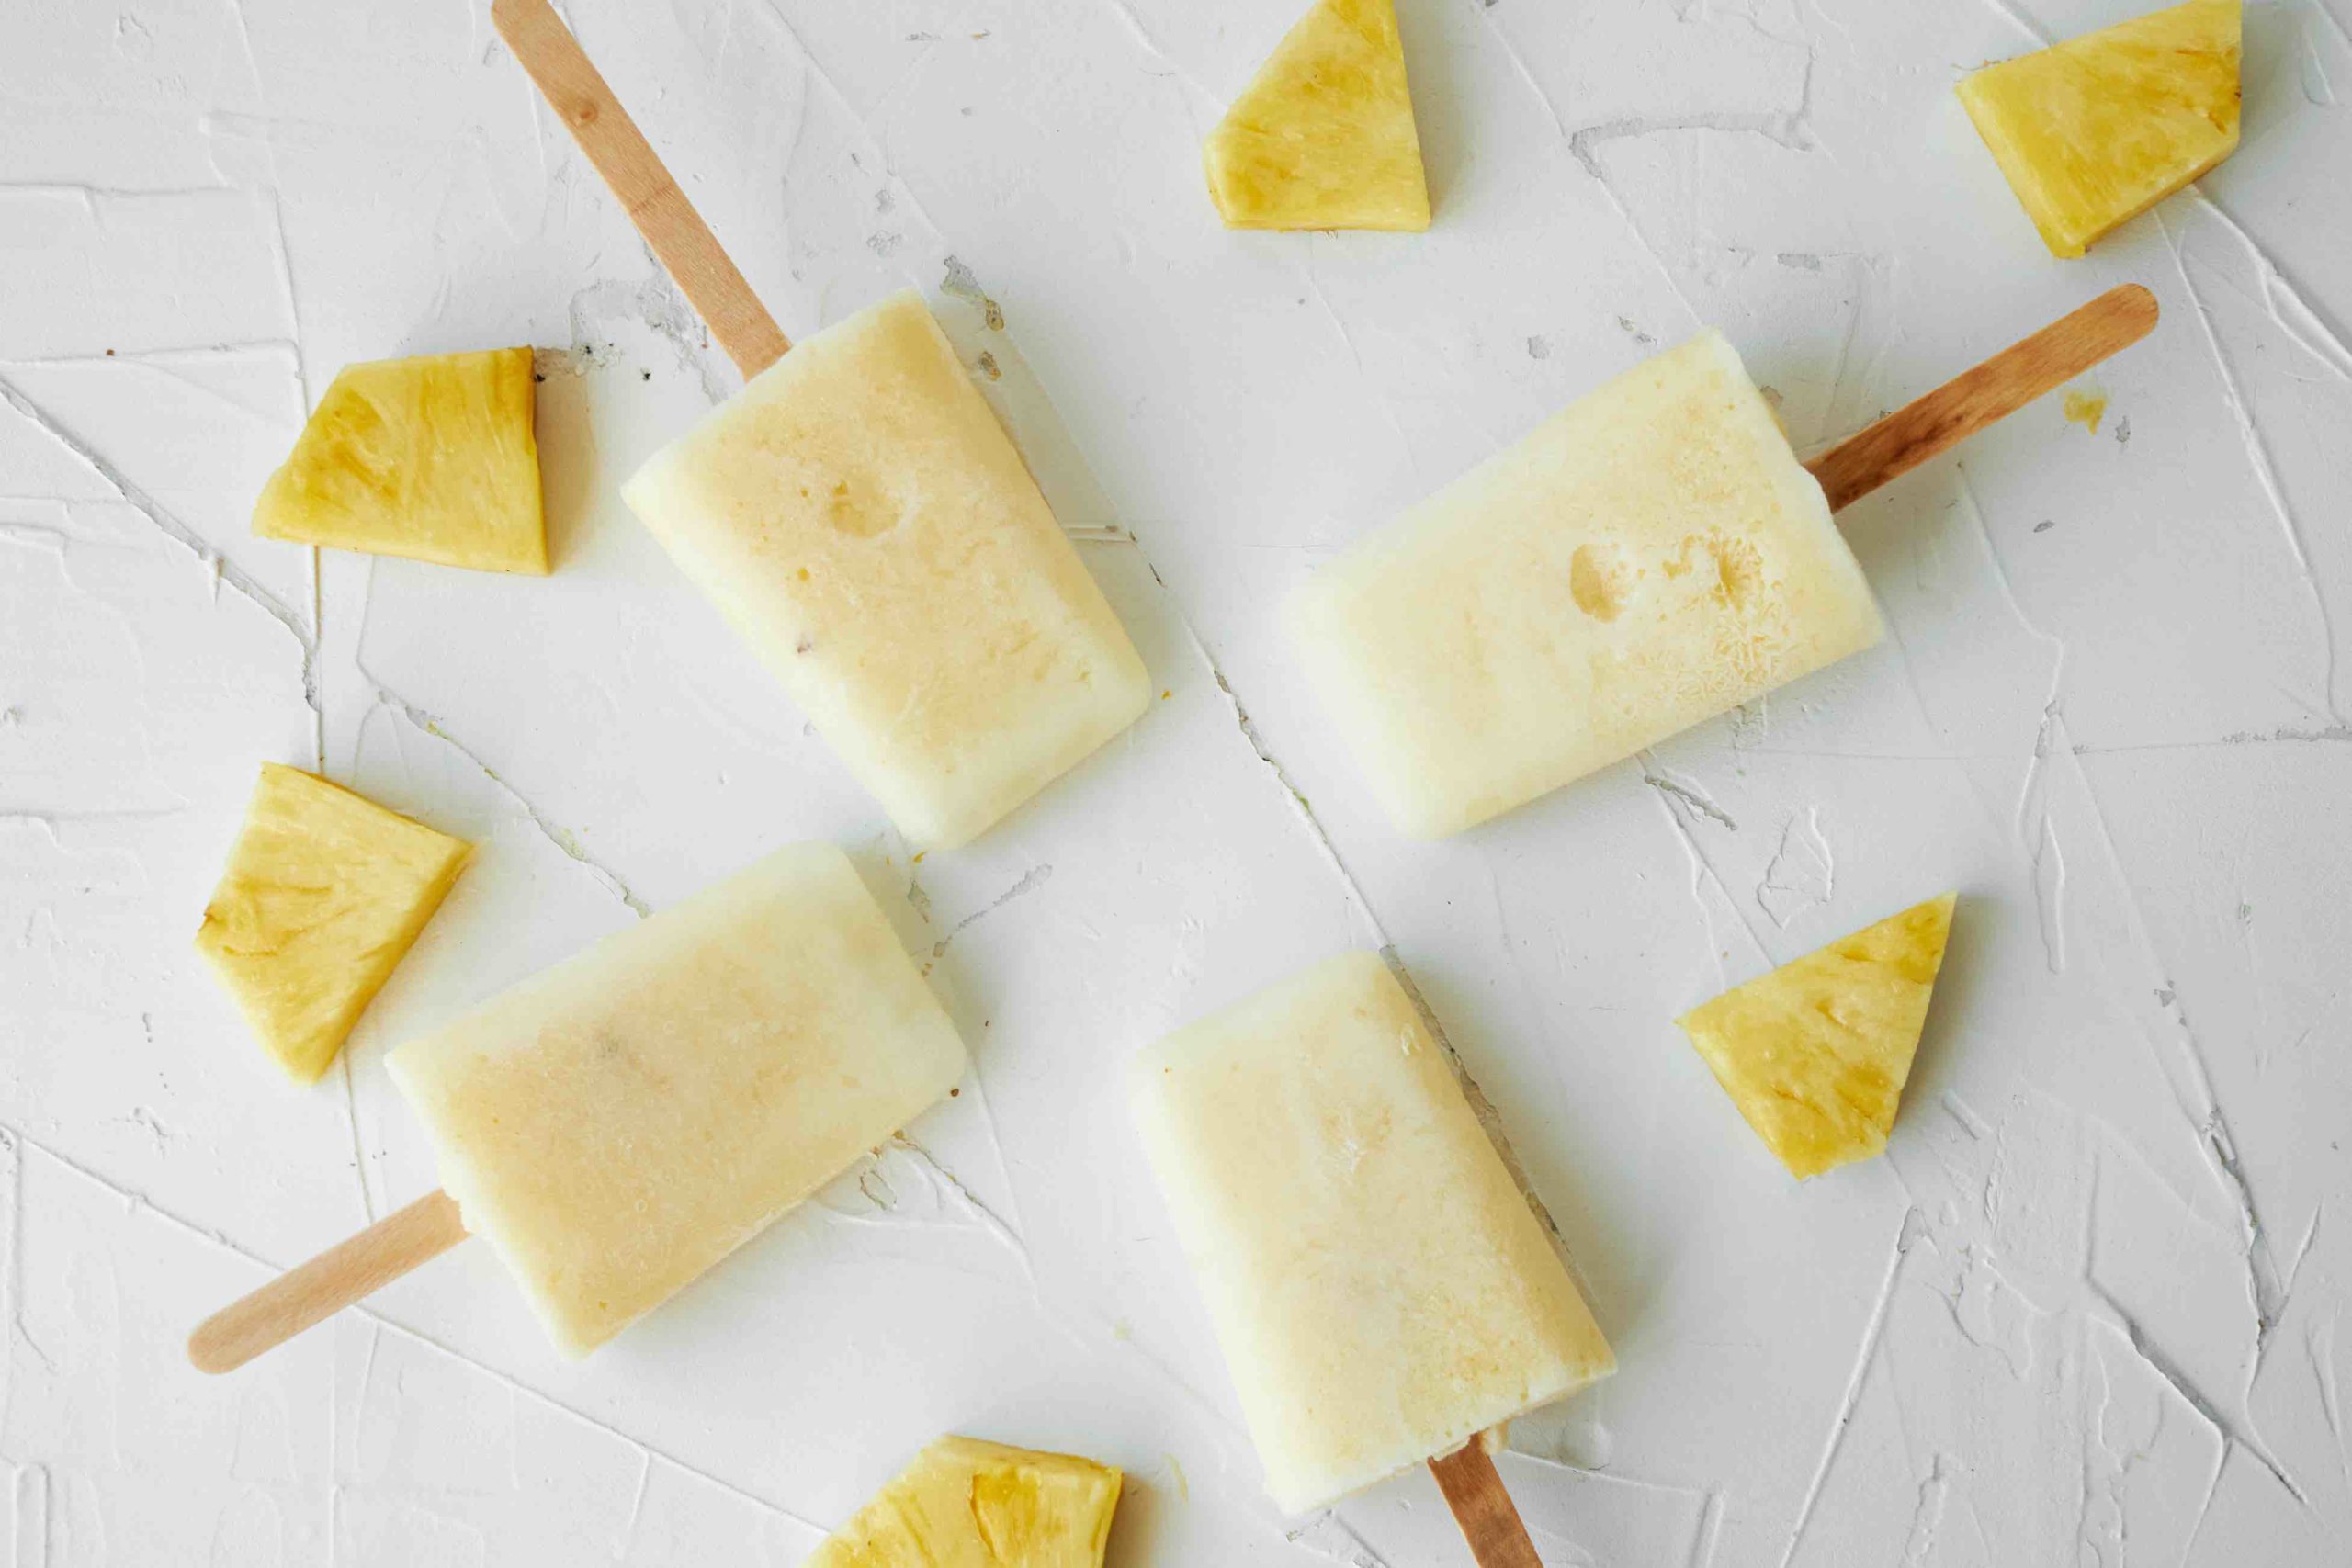 Homemade Pineapple Popsicle Recipe by top Hawaii blog Hawaii Travel with Kids